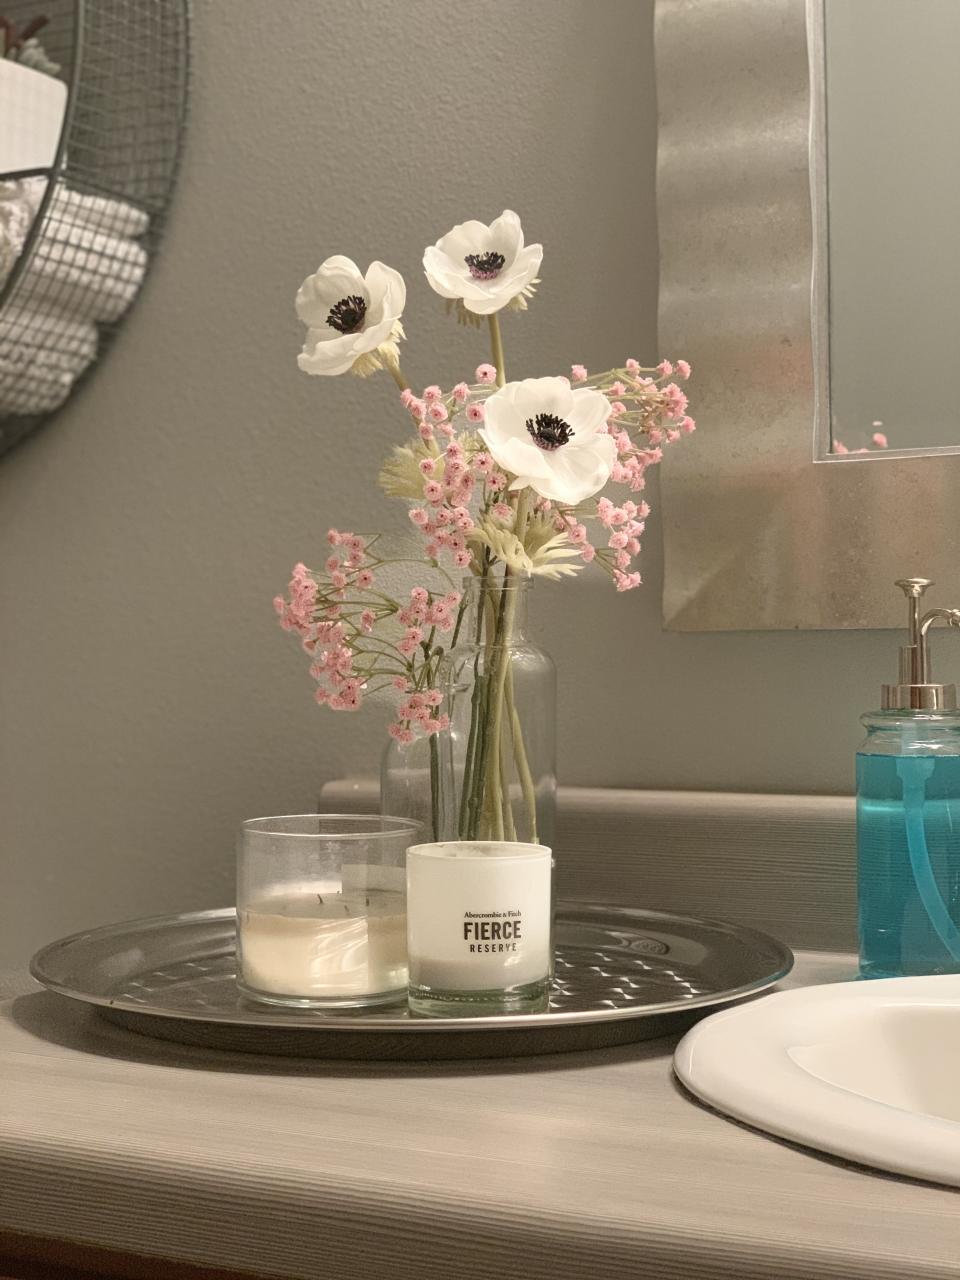 Bathroom Decor flowers & candles in 2020 Flower candle, Candle modern